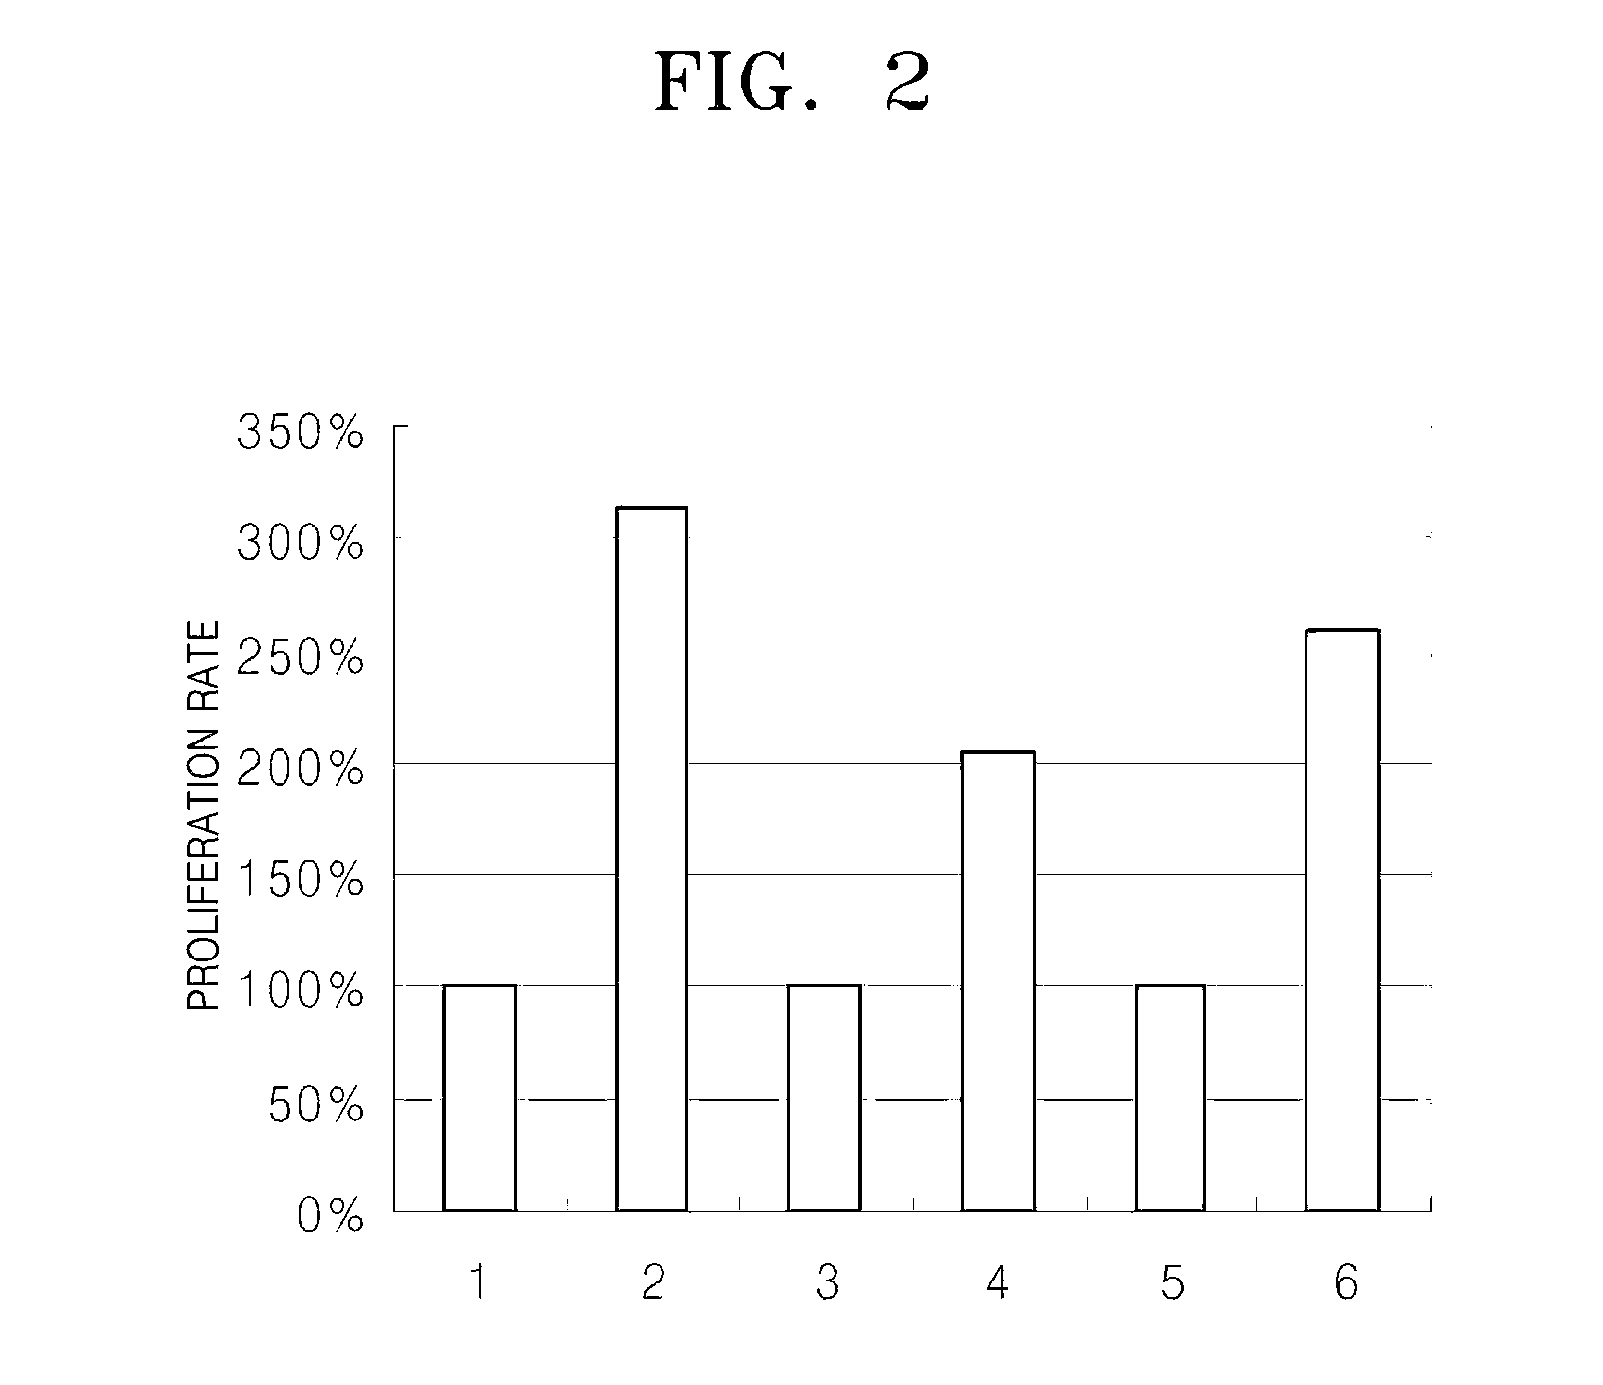 Medium for culturing hematopoietic cells and a method of culturing hematopoietic cells